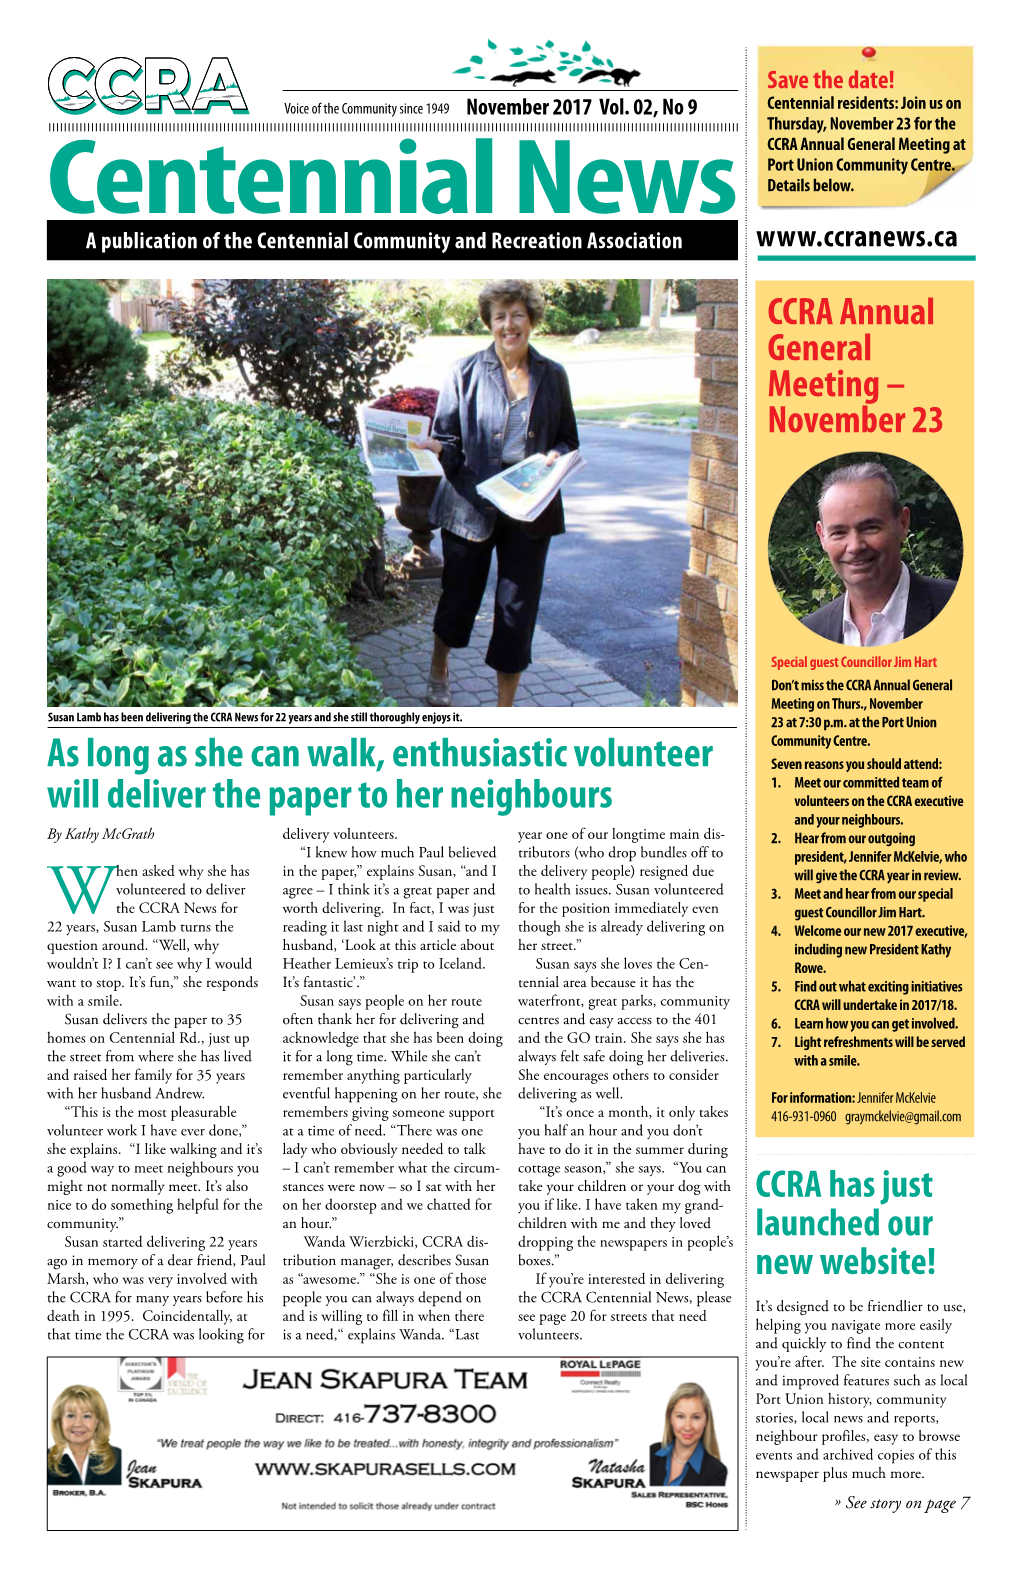 As Long As She Can Walk, Enthusiastic Volunteer Will Deliver the Paper To